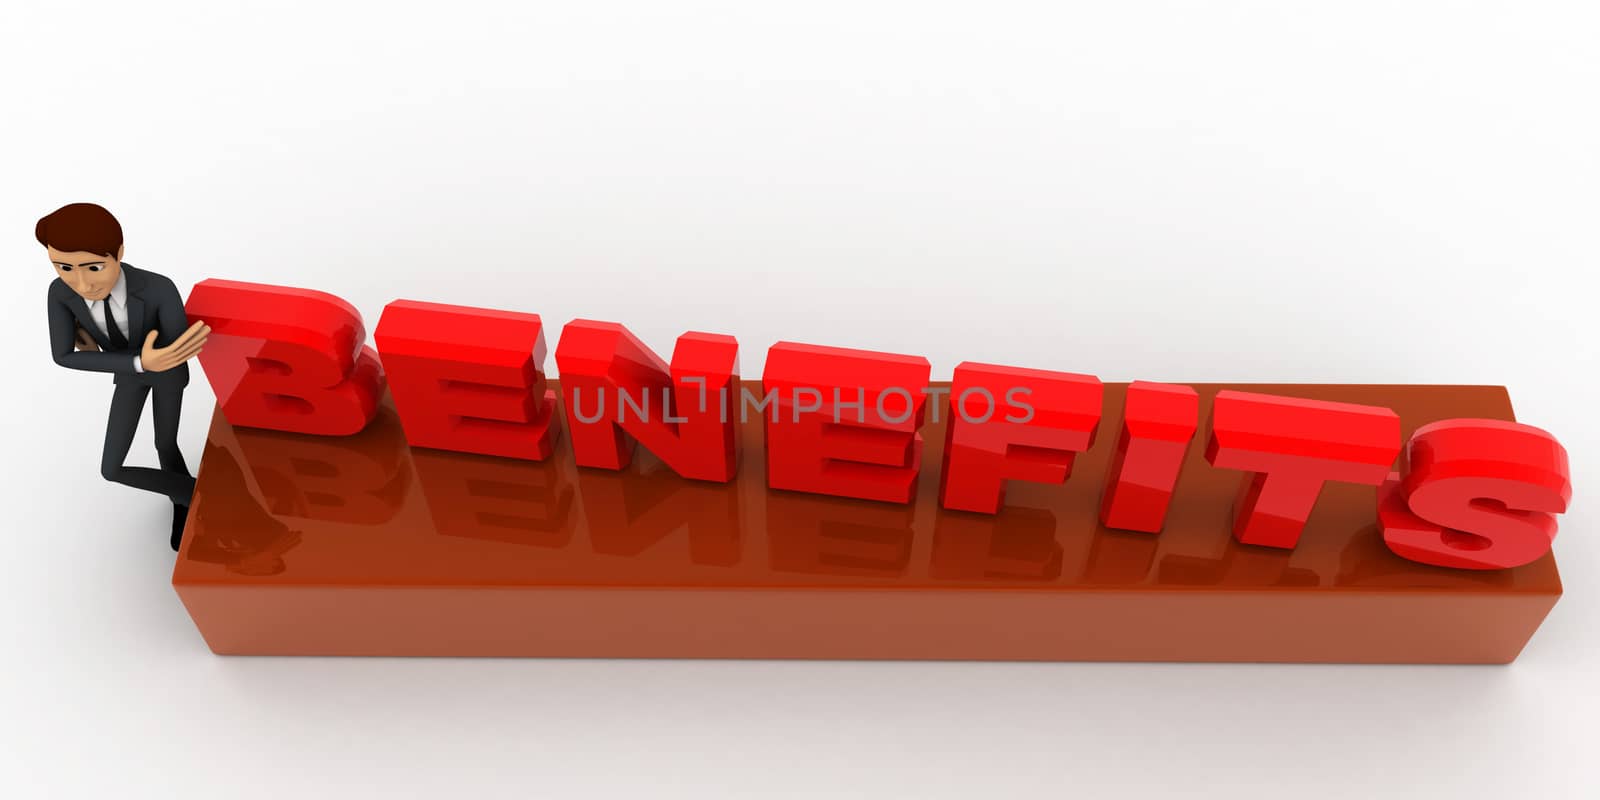 3d man with benifits text on cube concept on white background, top angle view